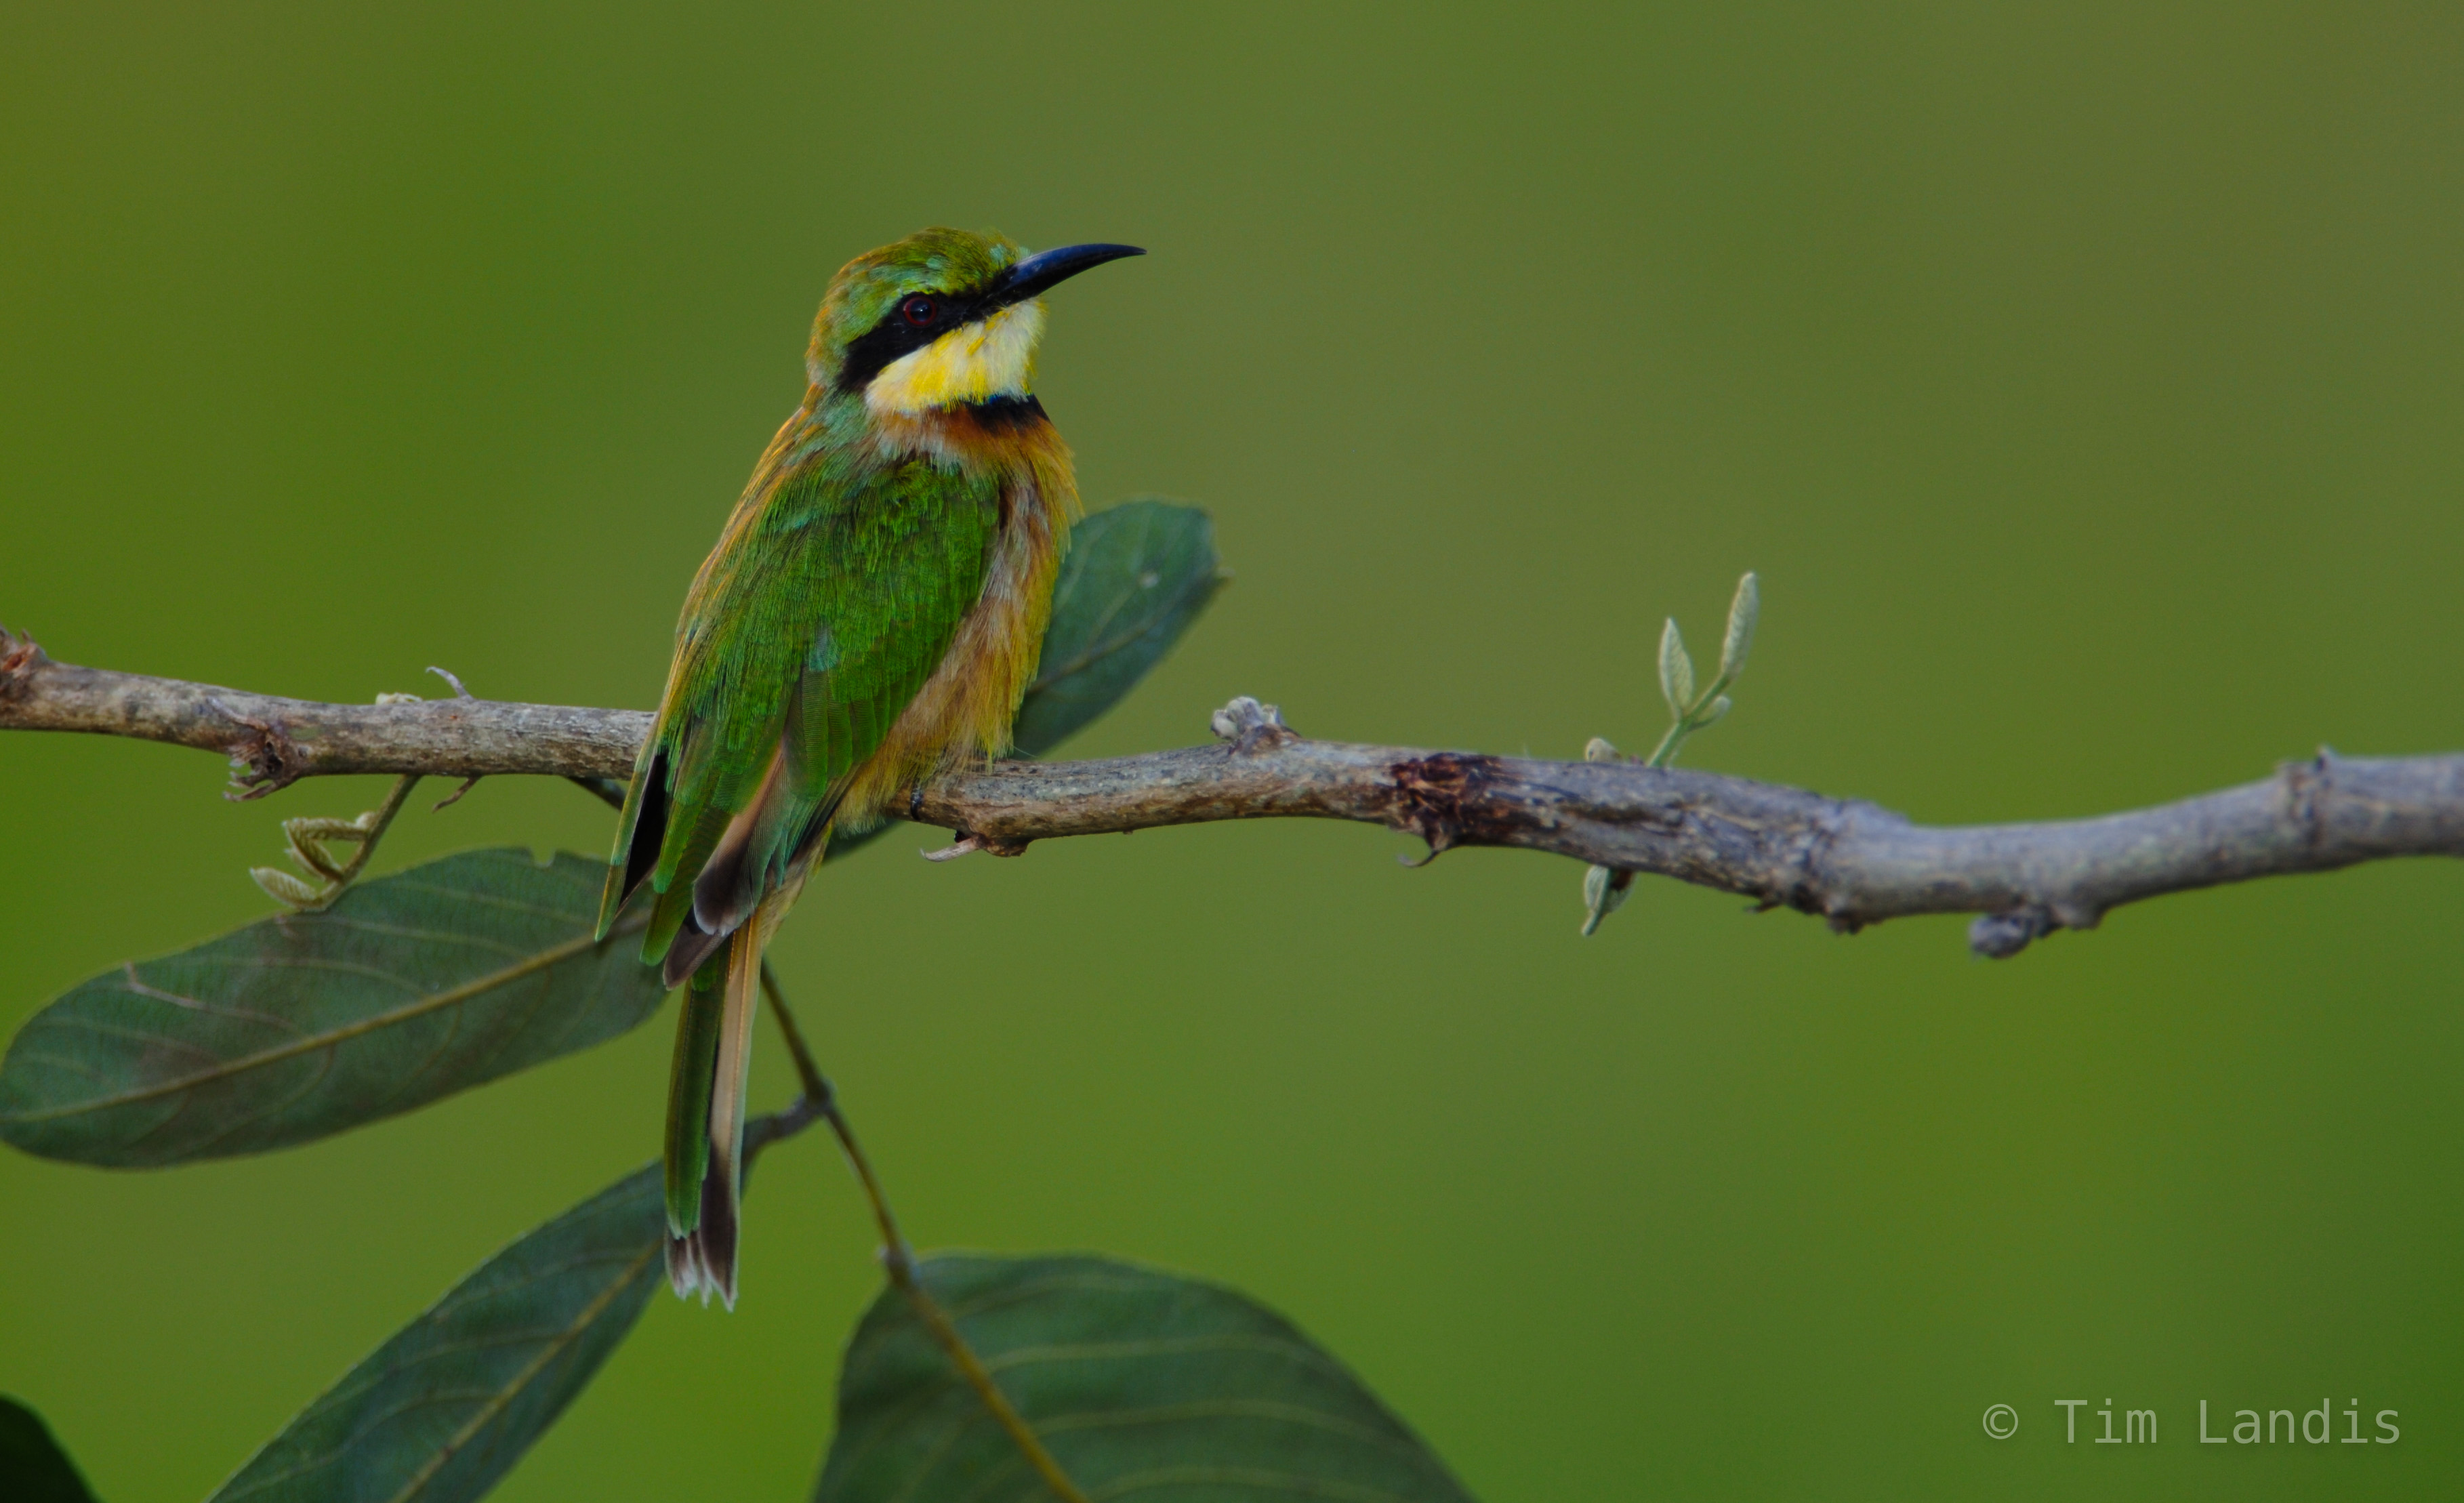 rear 3/4 view of little bee-eater